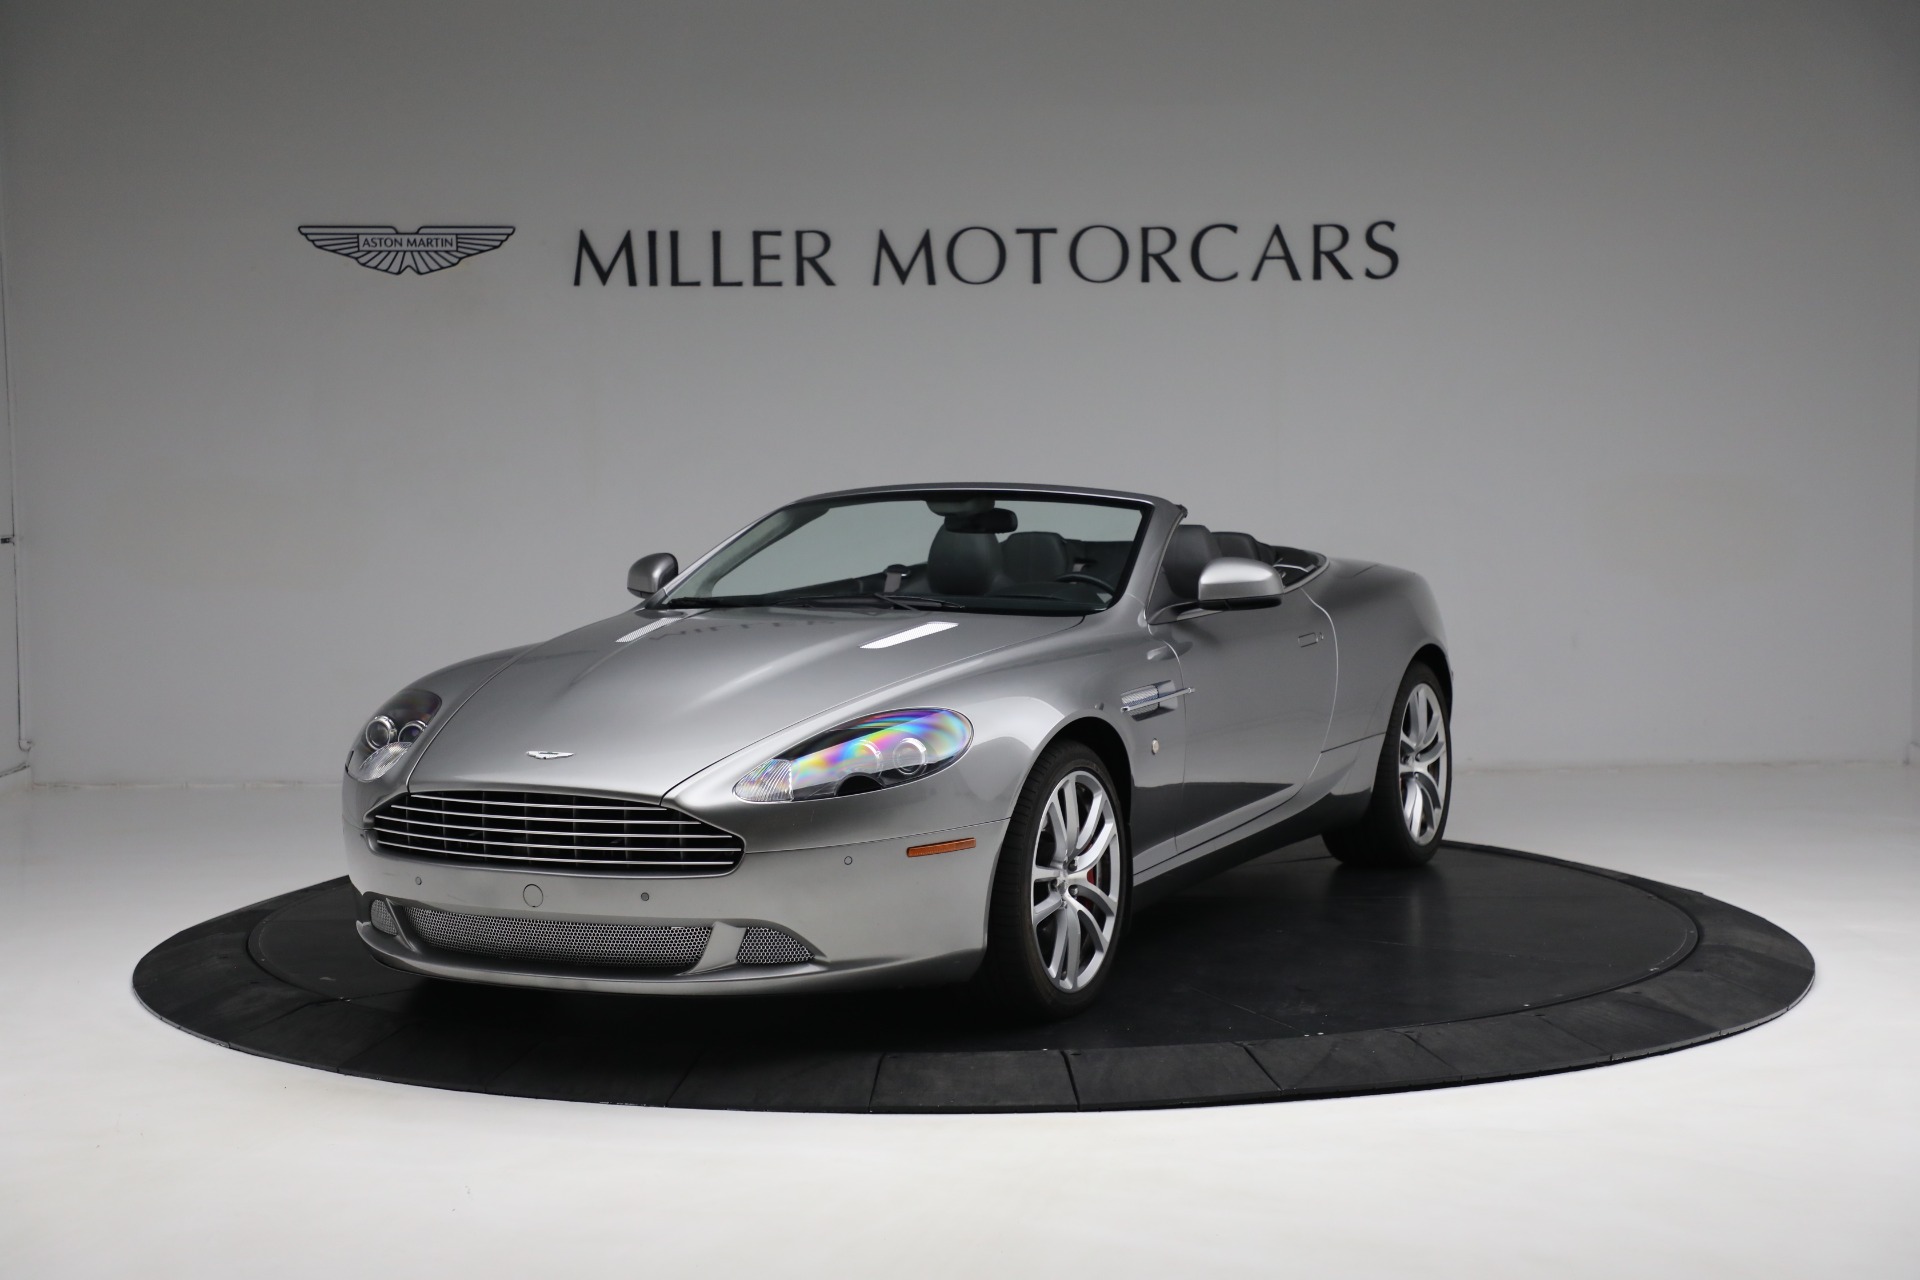 Used 2011 Aston Martin DB9 Volante for sale Call for price at Aston Martin of Greenwich in Greenwich CT 06830 1